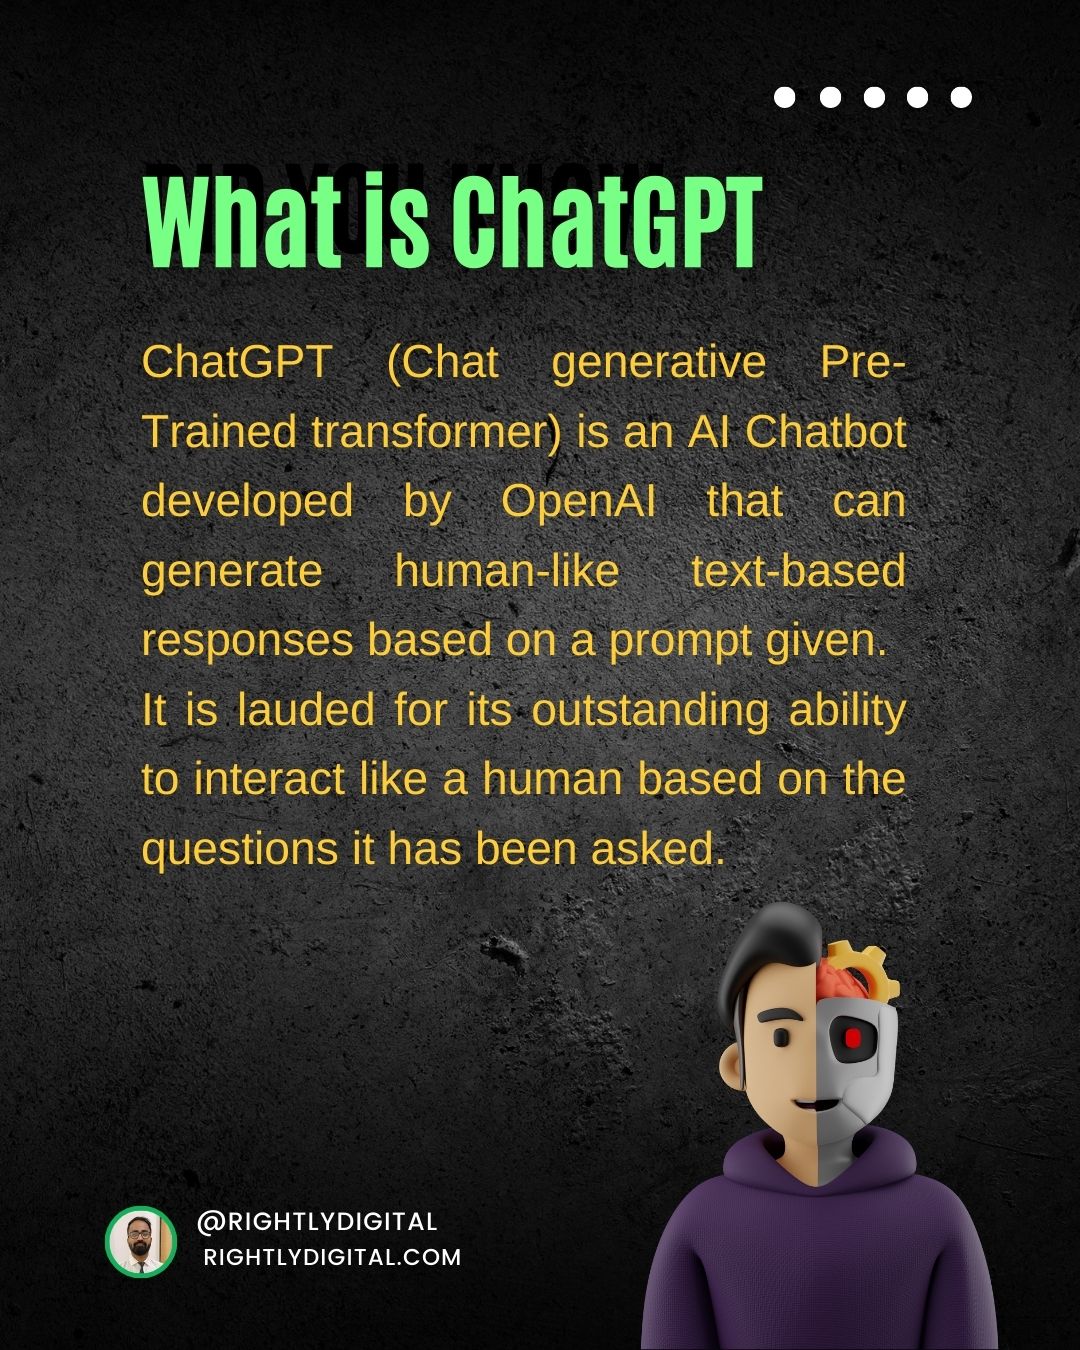 What is ChatGPT - ChatGPT (Chat generative Pre-Trained transformer) is an AI Chatbot developed by OpenAI that can generate human-like text-based responses based on a prompt given. 
It is lauded for its outstanding ability to interact like a human based on the questions it has been asked. 
